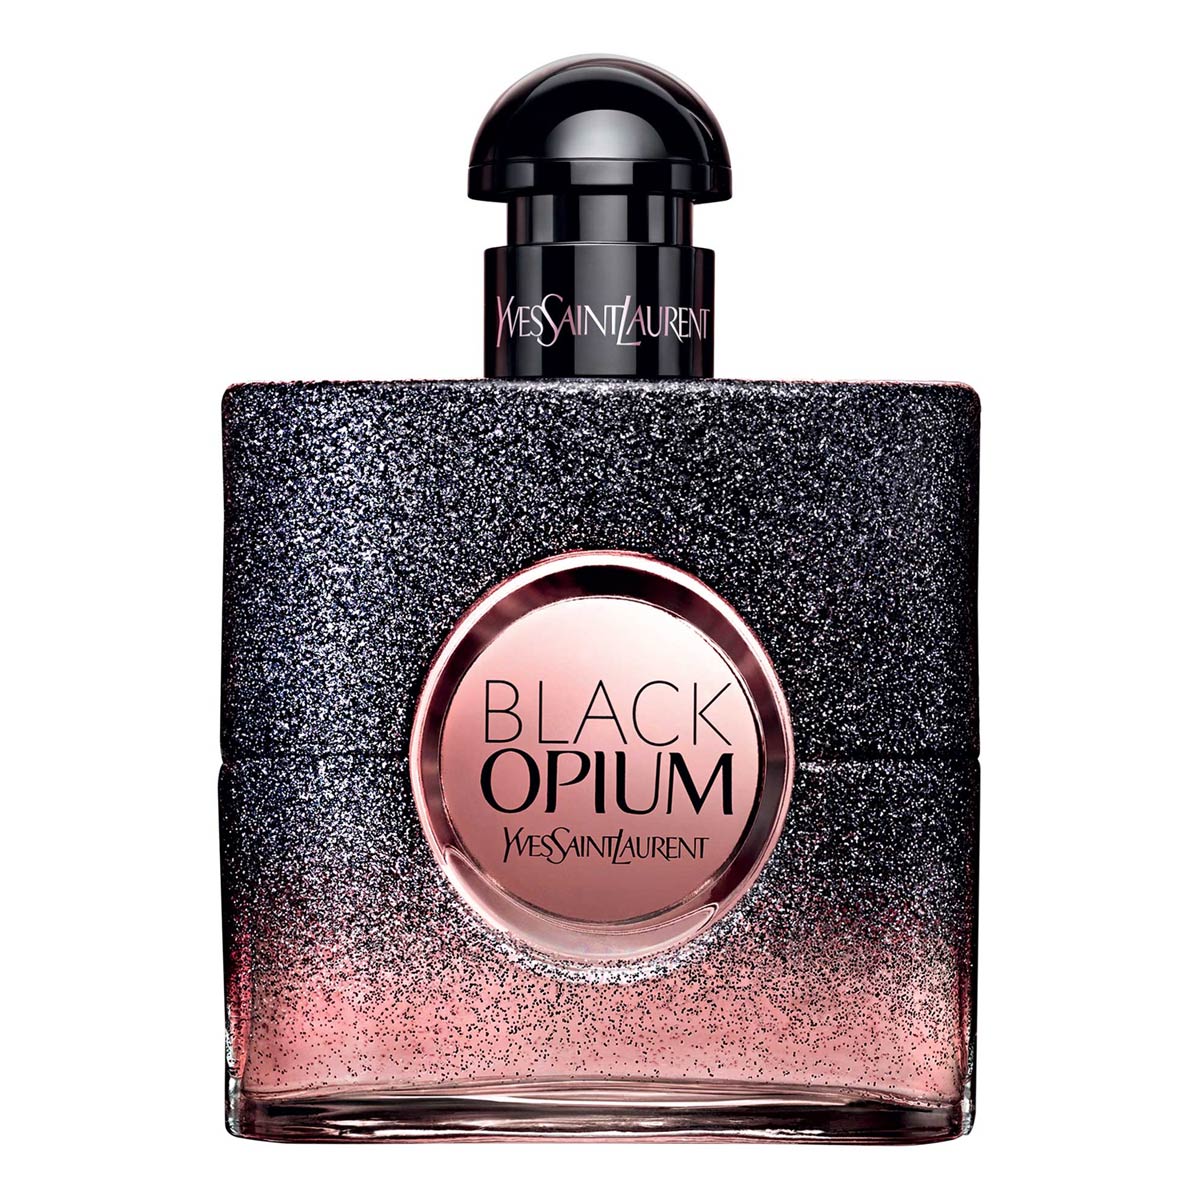 Women's 3.0 oz EDP Spray. Yves Saint Laurent announcee a new edition of the popular Black Opium collection launched in early 2017  called Black Opium Floral Shock. The new edition Black Opium Floral Shock is announced as a fresher version with more floral and green aromas and the first one to possess the iced coffee accord. The new composition belongs to the family of fruity florientals and shocks with its zesty lemon opening  white floral character in the heart with dominant gardenia  and iced coffee and white musk at the base of the perfume.The freshness of lemon  bergamot and pear in the top notes mixed with freesia is the first floral accord of the composition. The heart includes white flowers of golden gardenia  orange blossom and a solar floral accord. The base ends with iced coffee  white musk  mineral accord and woody amber. Perfumers Nathalie Lorson  Marie Salamagne  Olivier Cresp and Honorine Blanc collaborated on the creation.